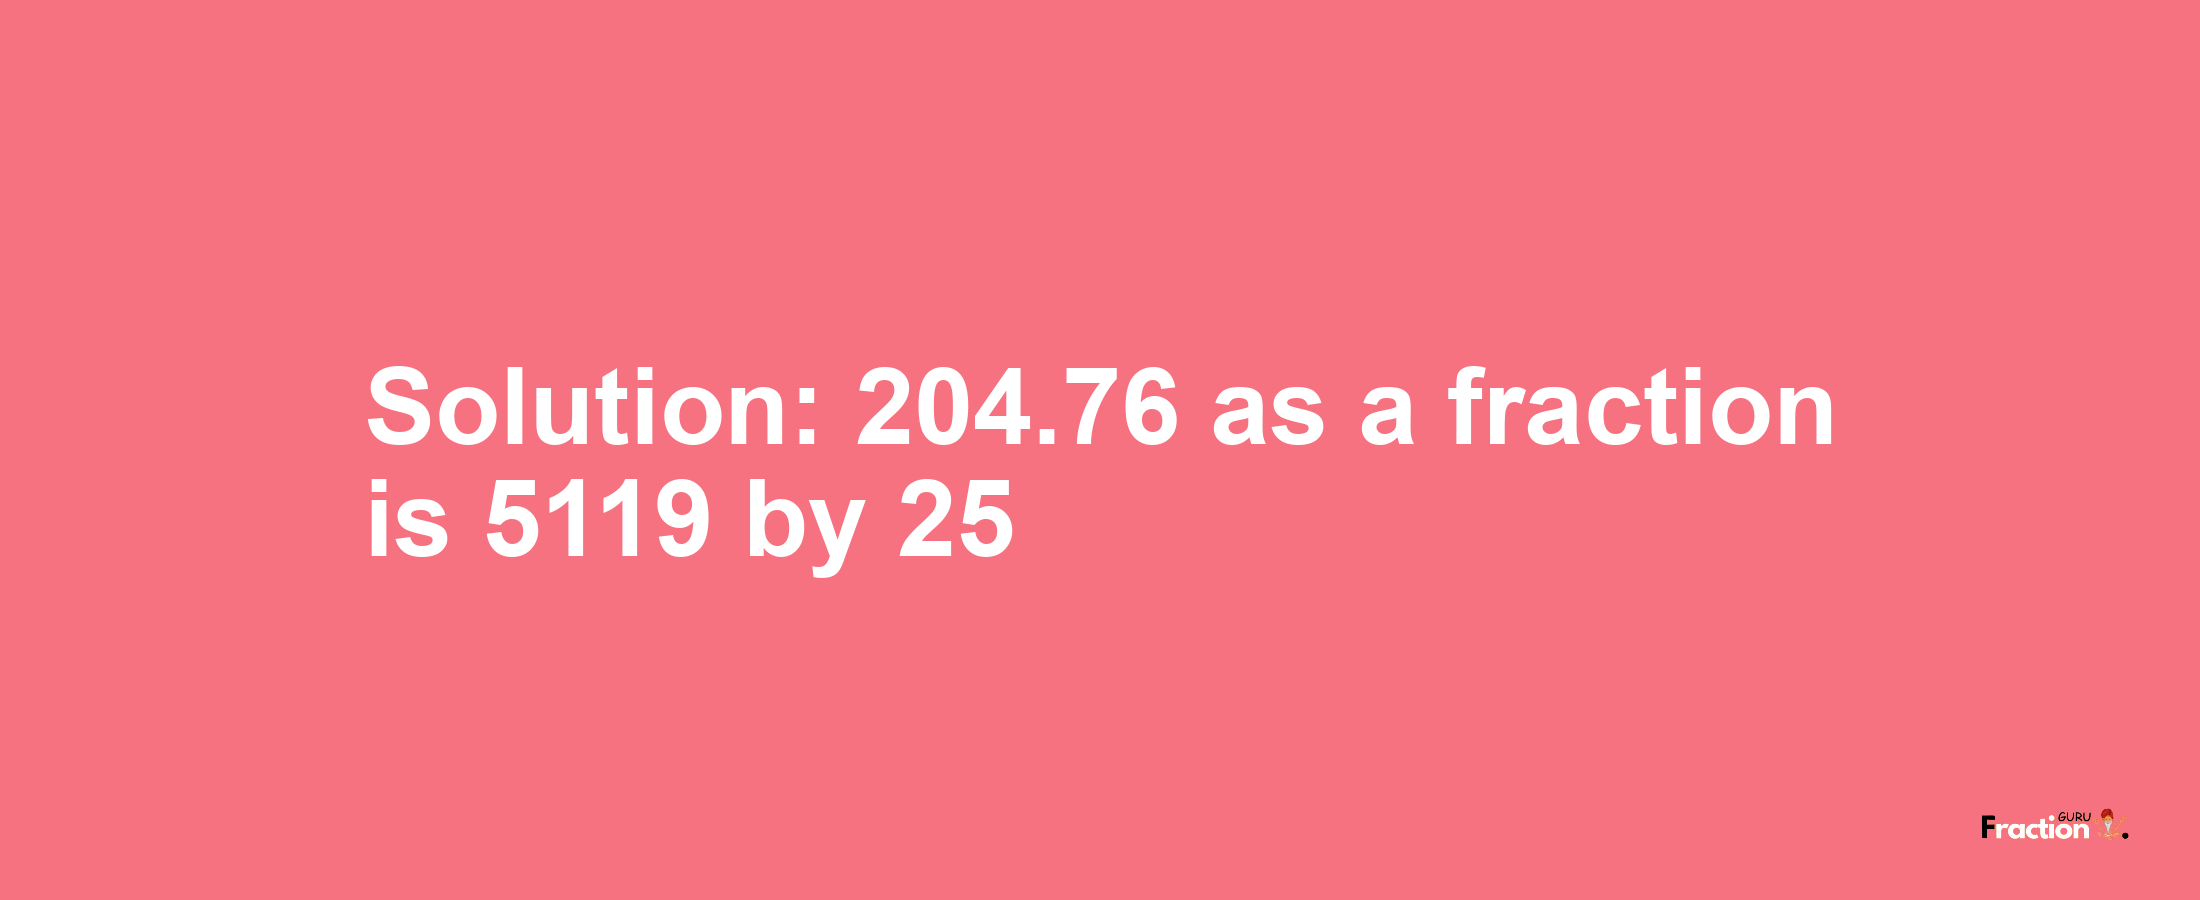 Solution:204.76 as a fraction is 5119/25